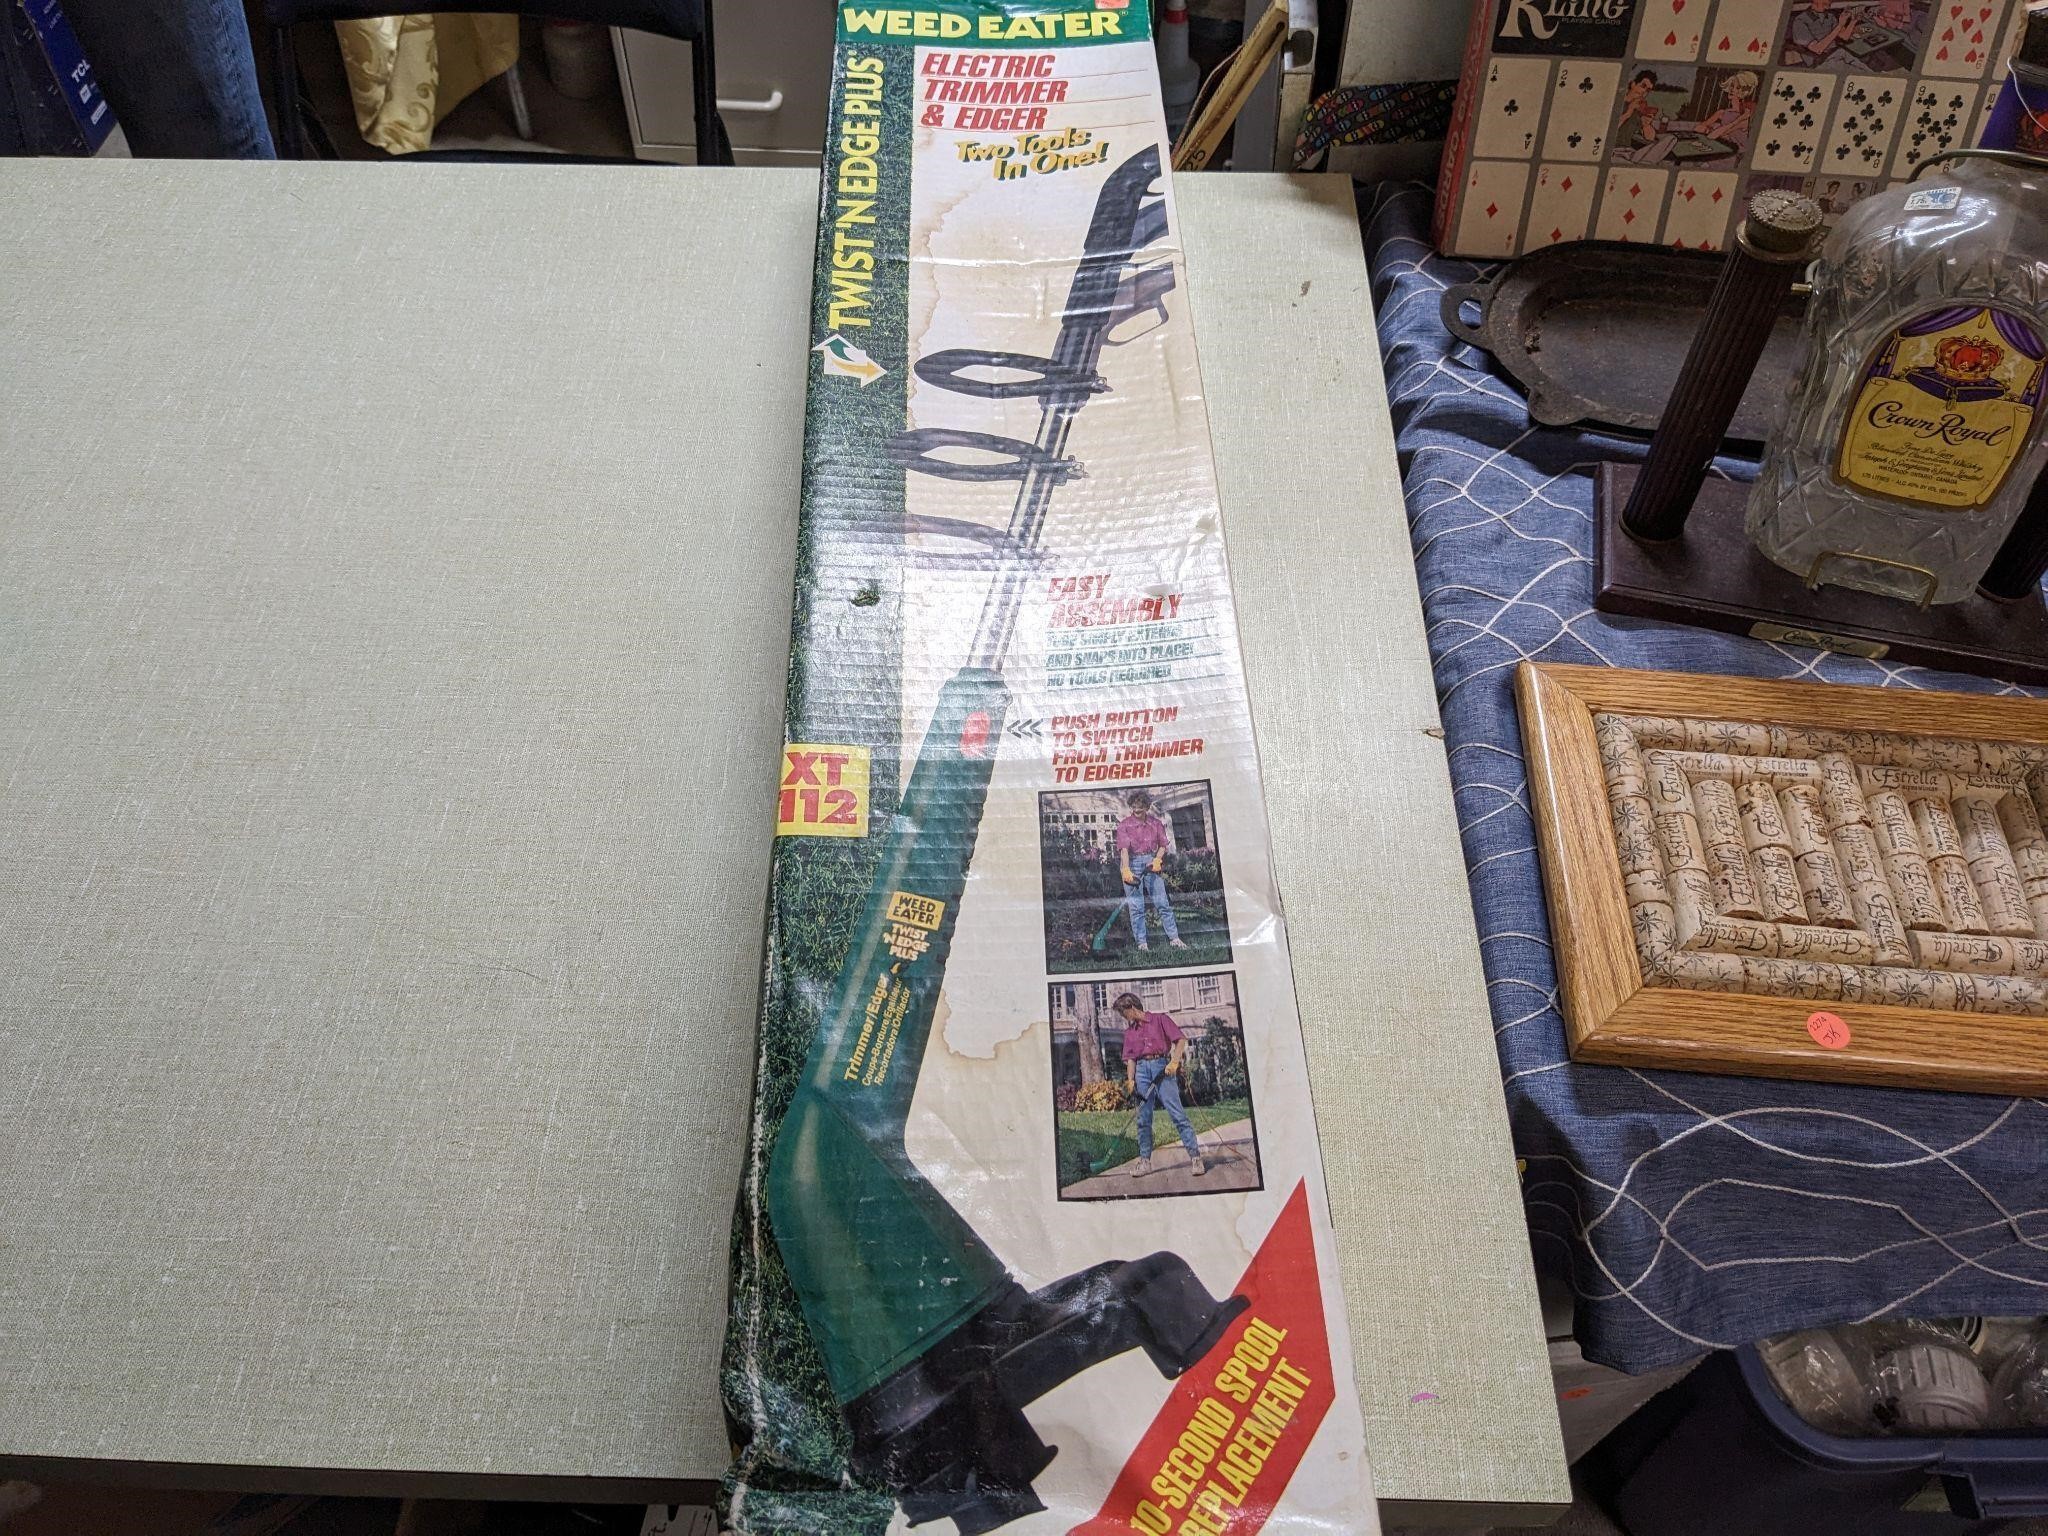 Weed Eater Electric Trimmer & Edger